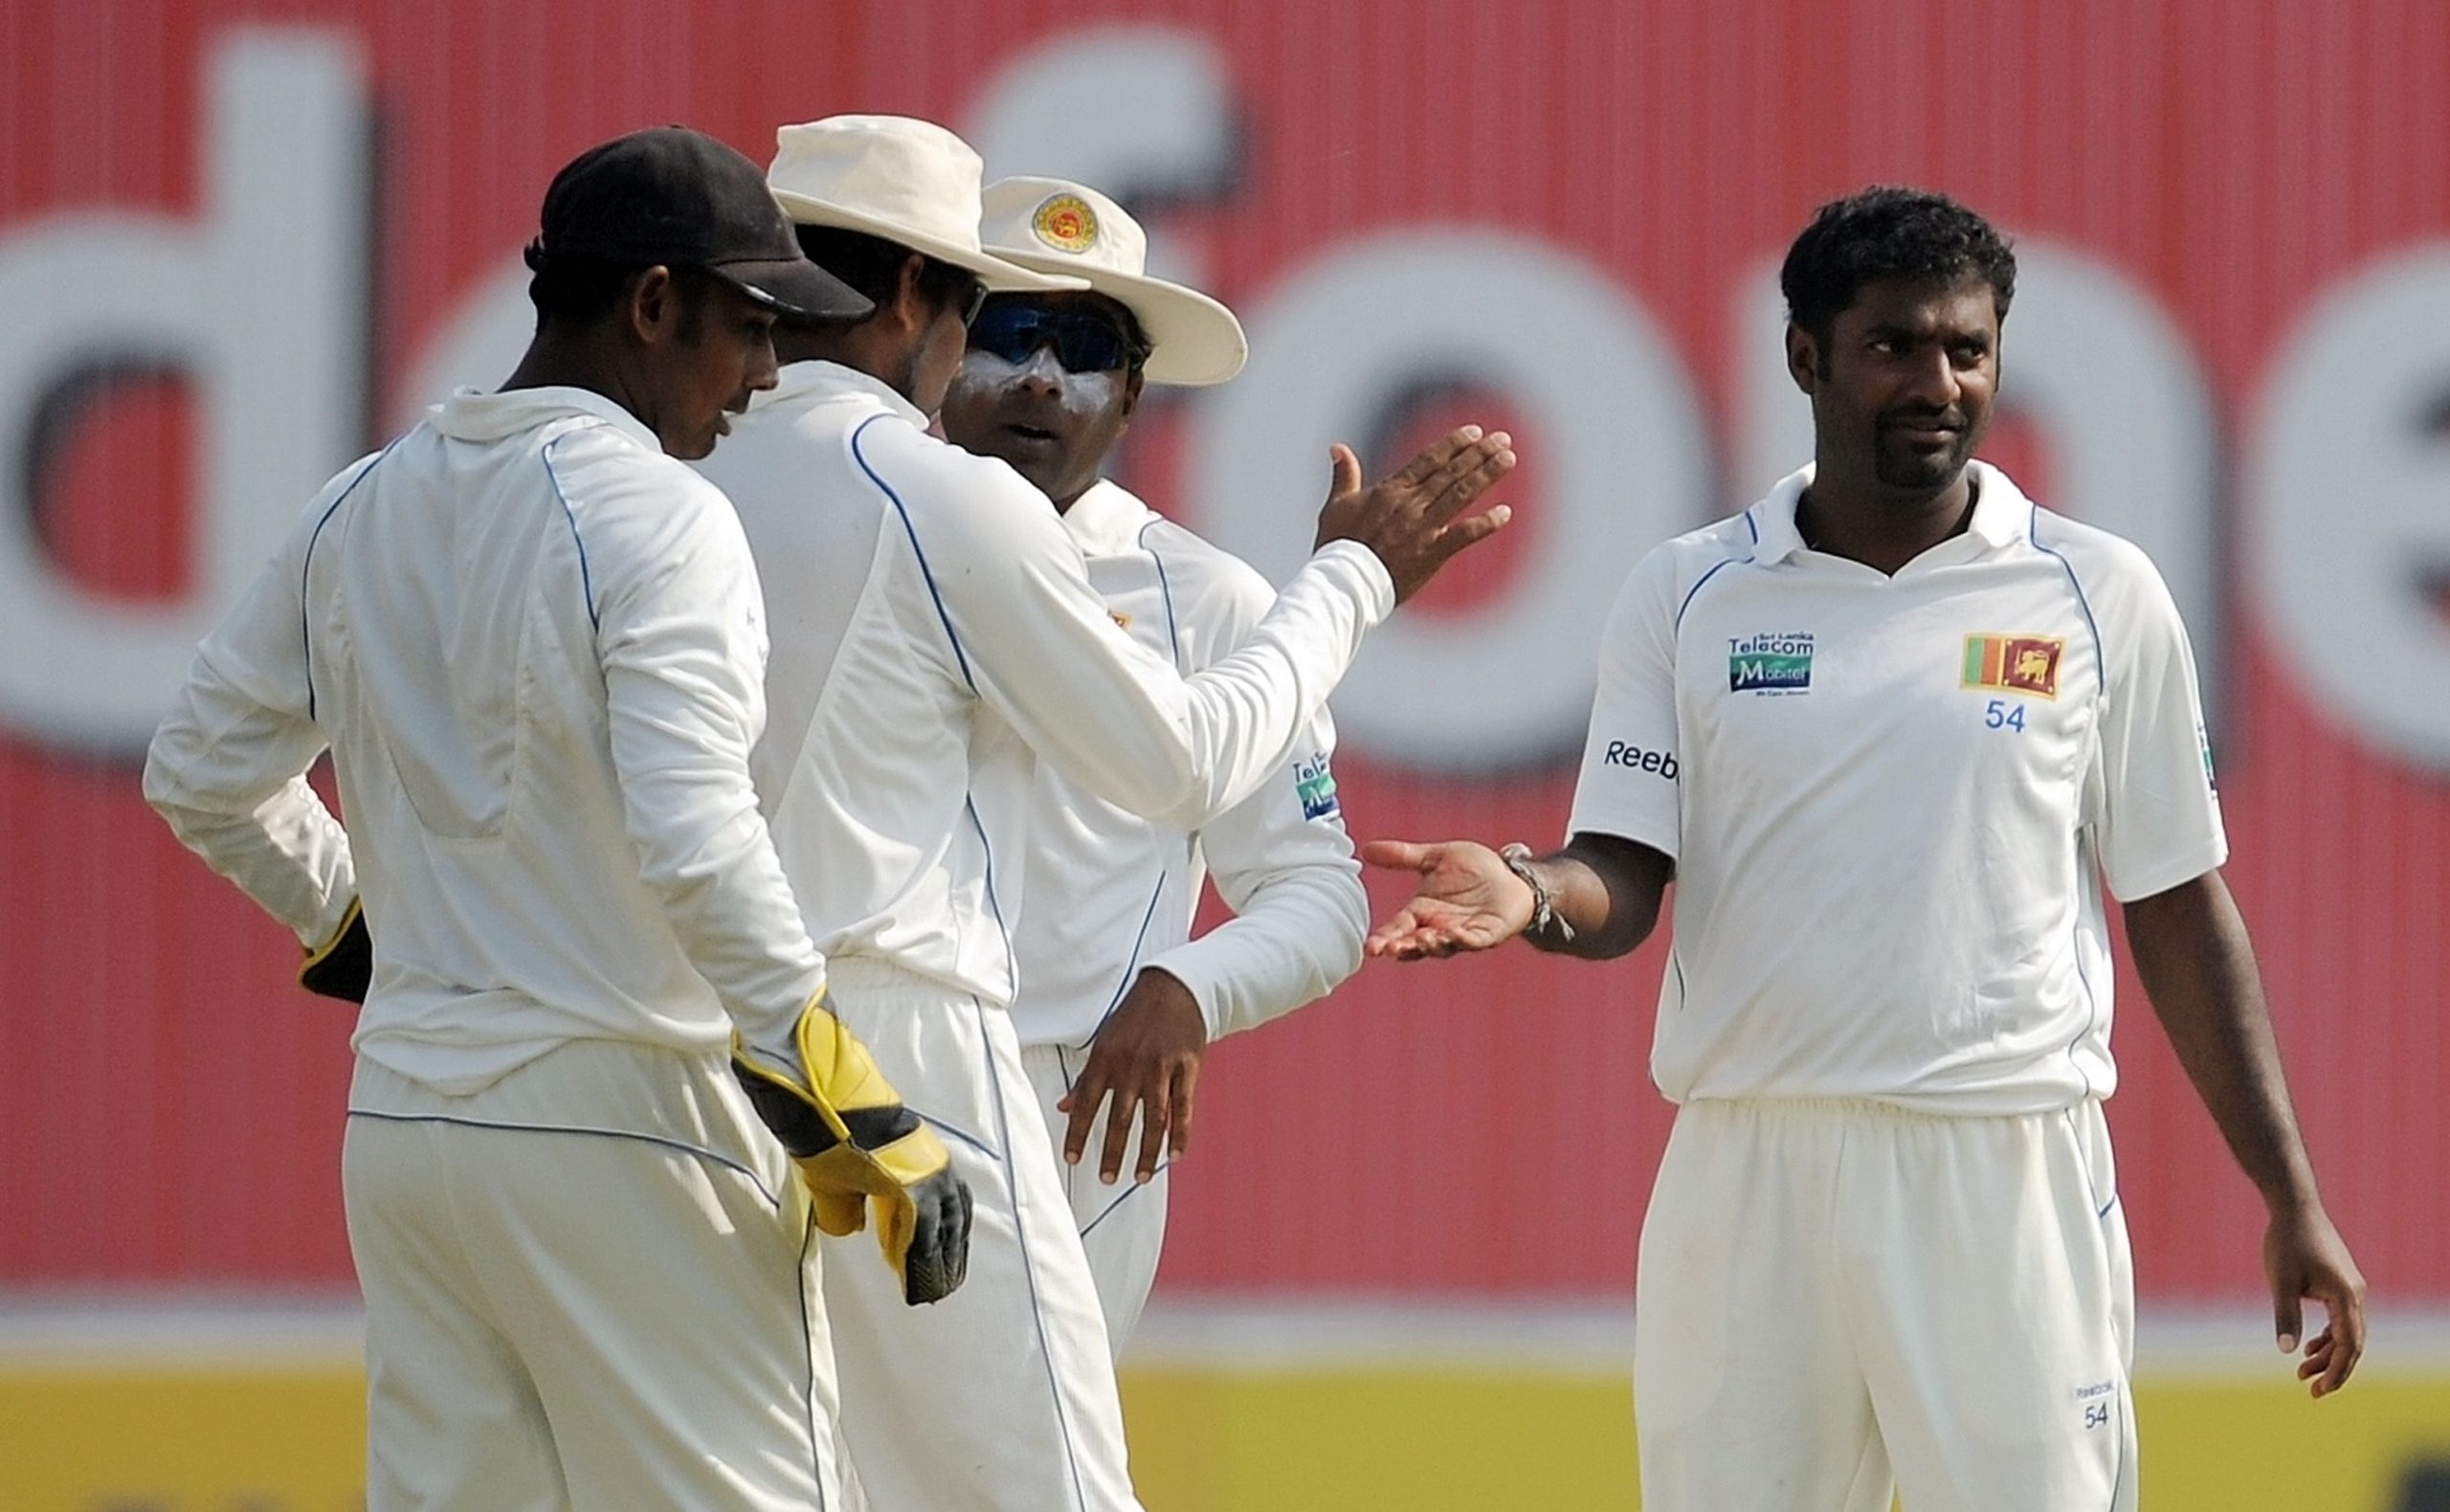 When Mutthiah Muralitharan asked Ishant Sharma to whack one and get out for his 800th Test wicket